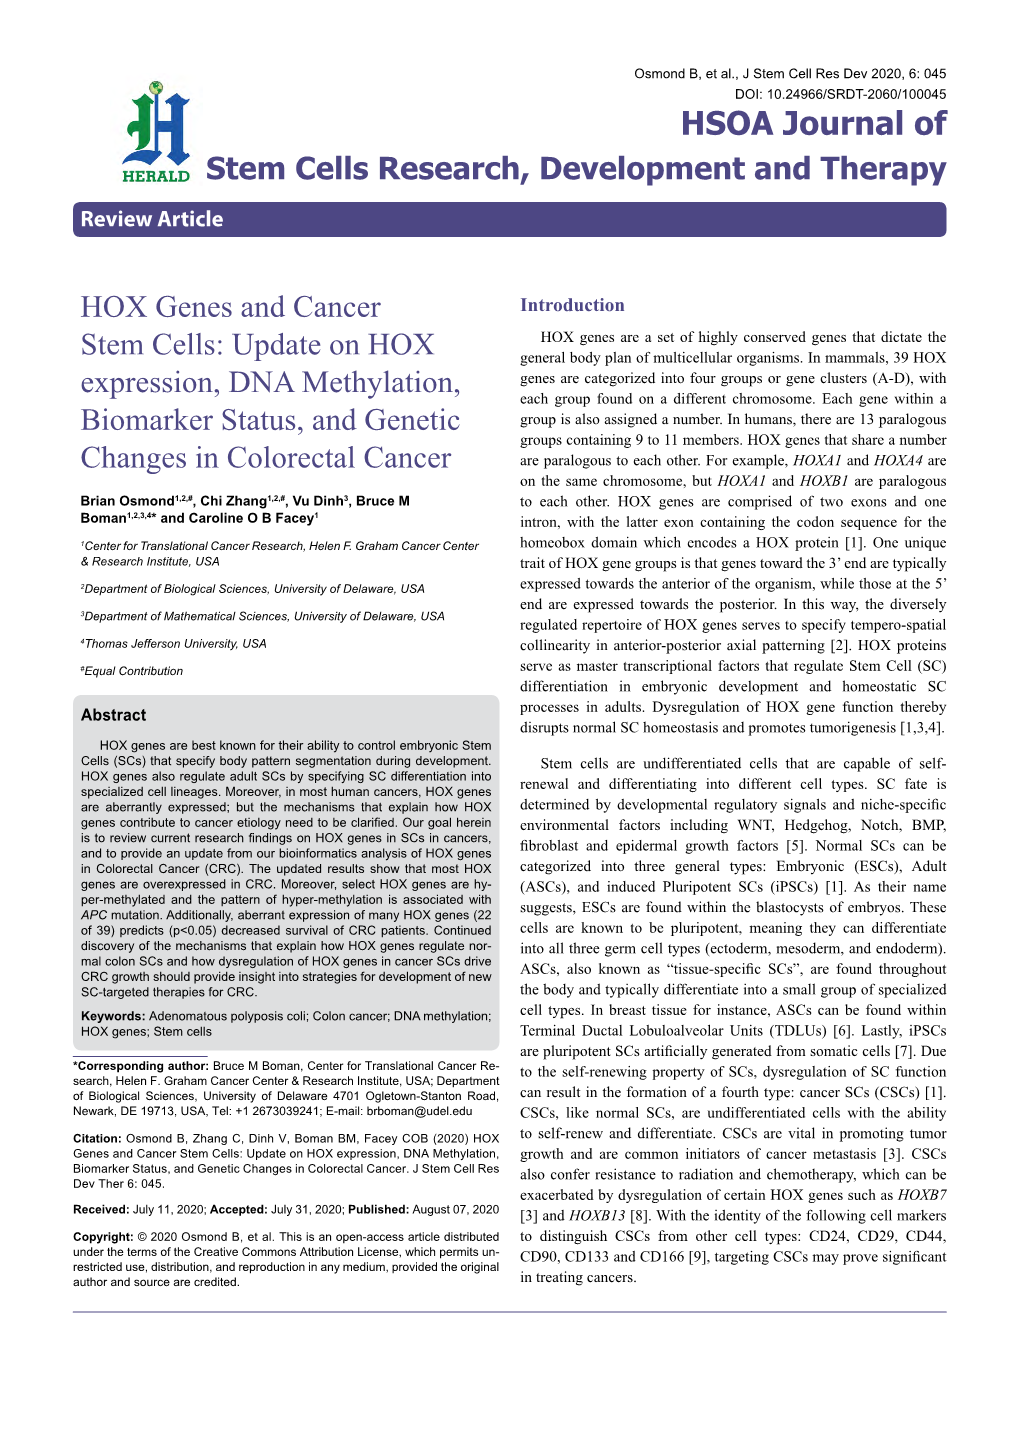 HOX Genes and Cancer Stem Cells: Update on HOX Expression, DNA Methylation, Biomarker Status, and Genetic Changes in Colorectal Cancer